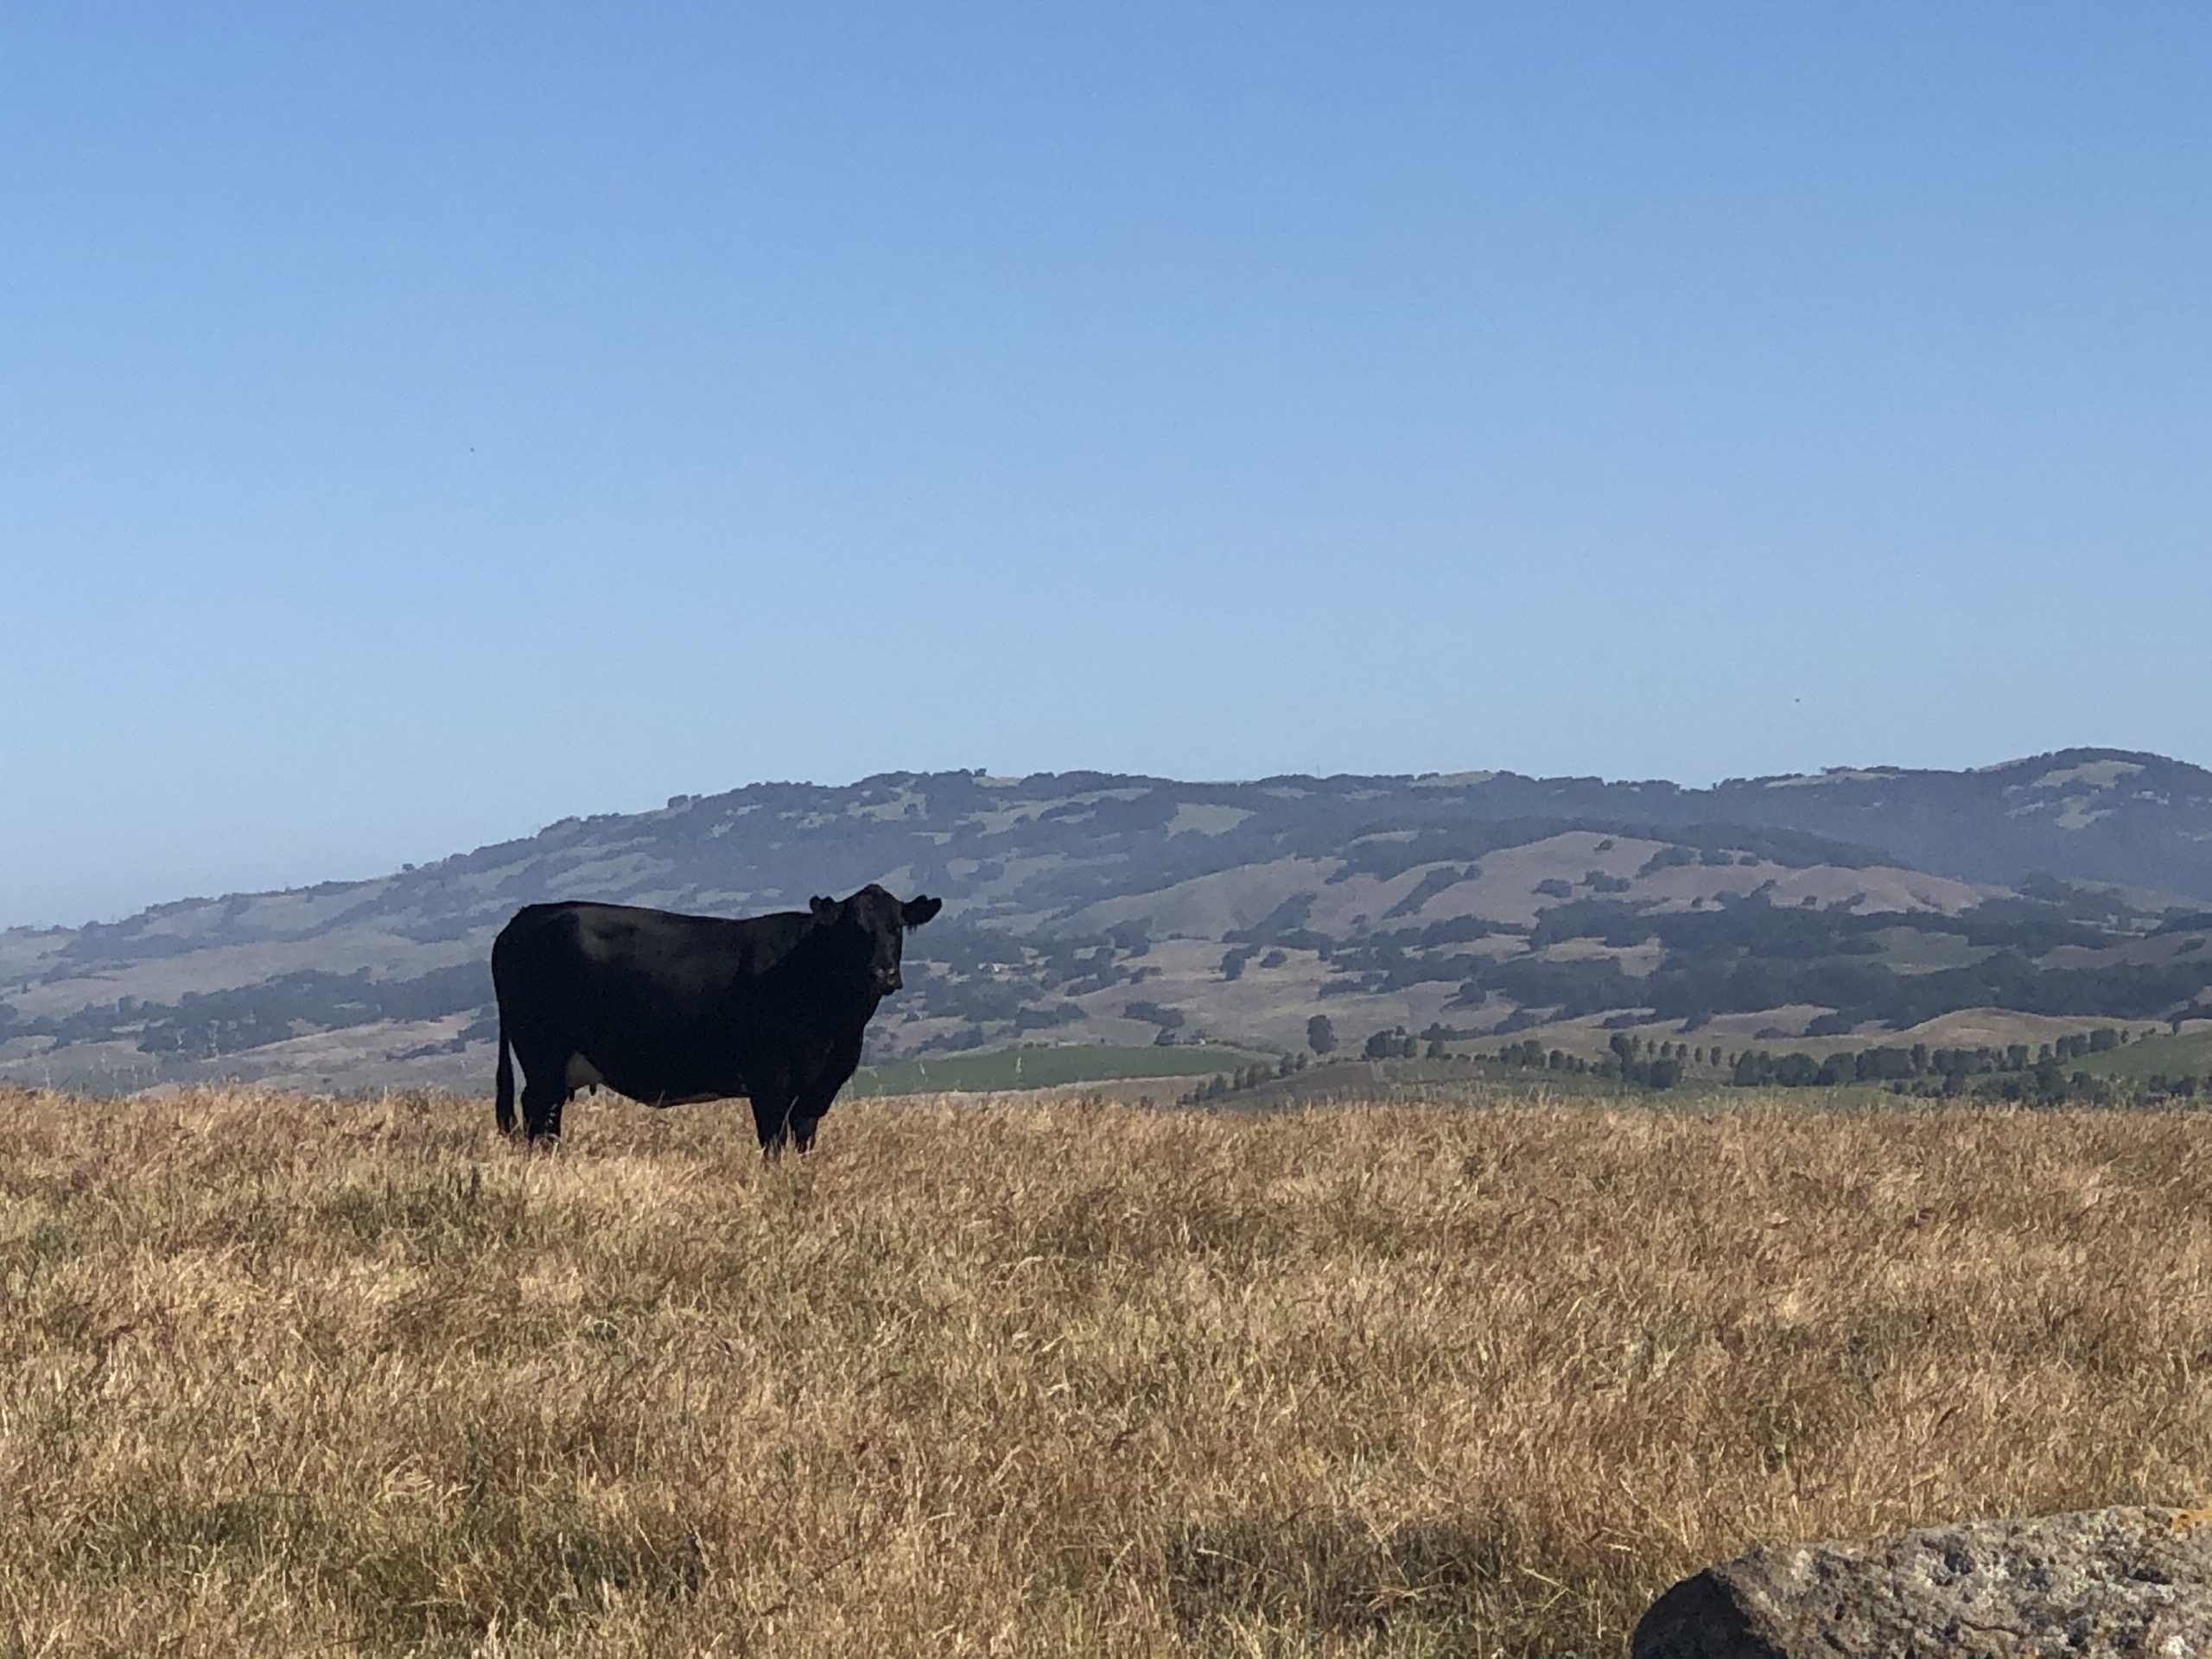 Black cow standing an annual grassland with hills in background (Sonoma County)